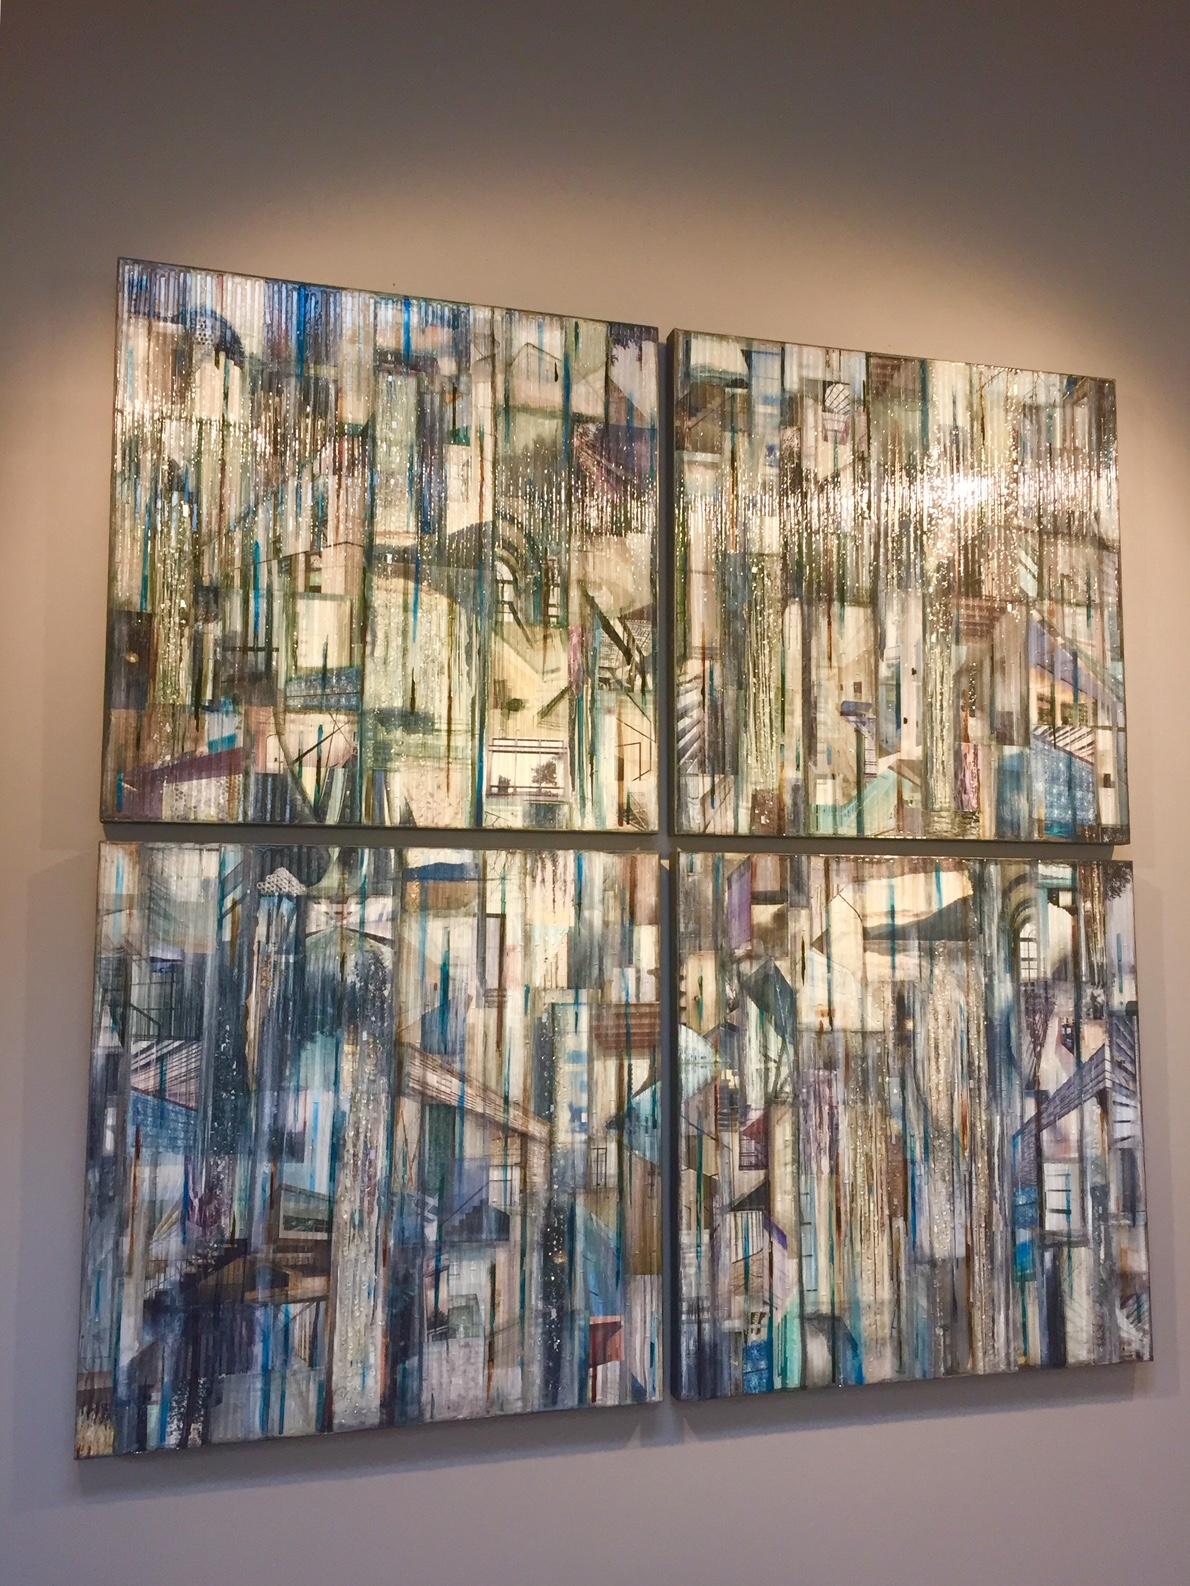 Water Falling is a quadtych measuring 60" x 60" priced for all four pieces at $17,300.  Individual pieces can be purchased measuring 30" x 30" for $4,500. 
Colors are blue, green, gold, brown, black

Madonna Phillip's  original art technique in